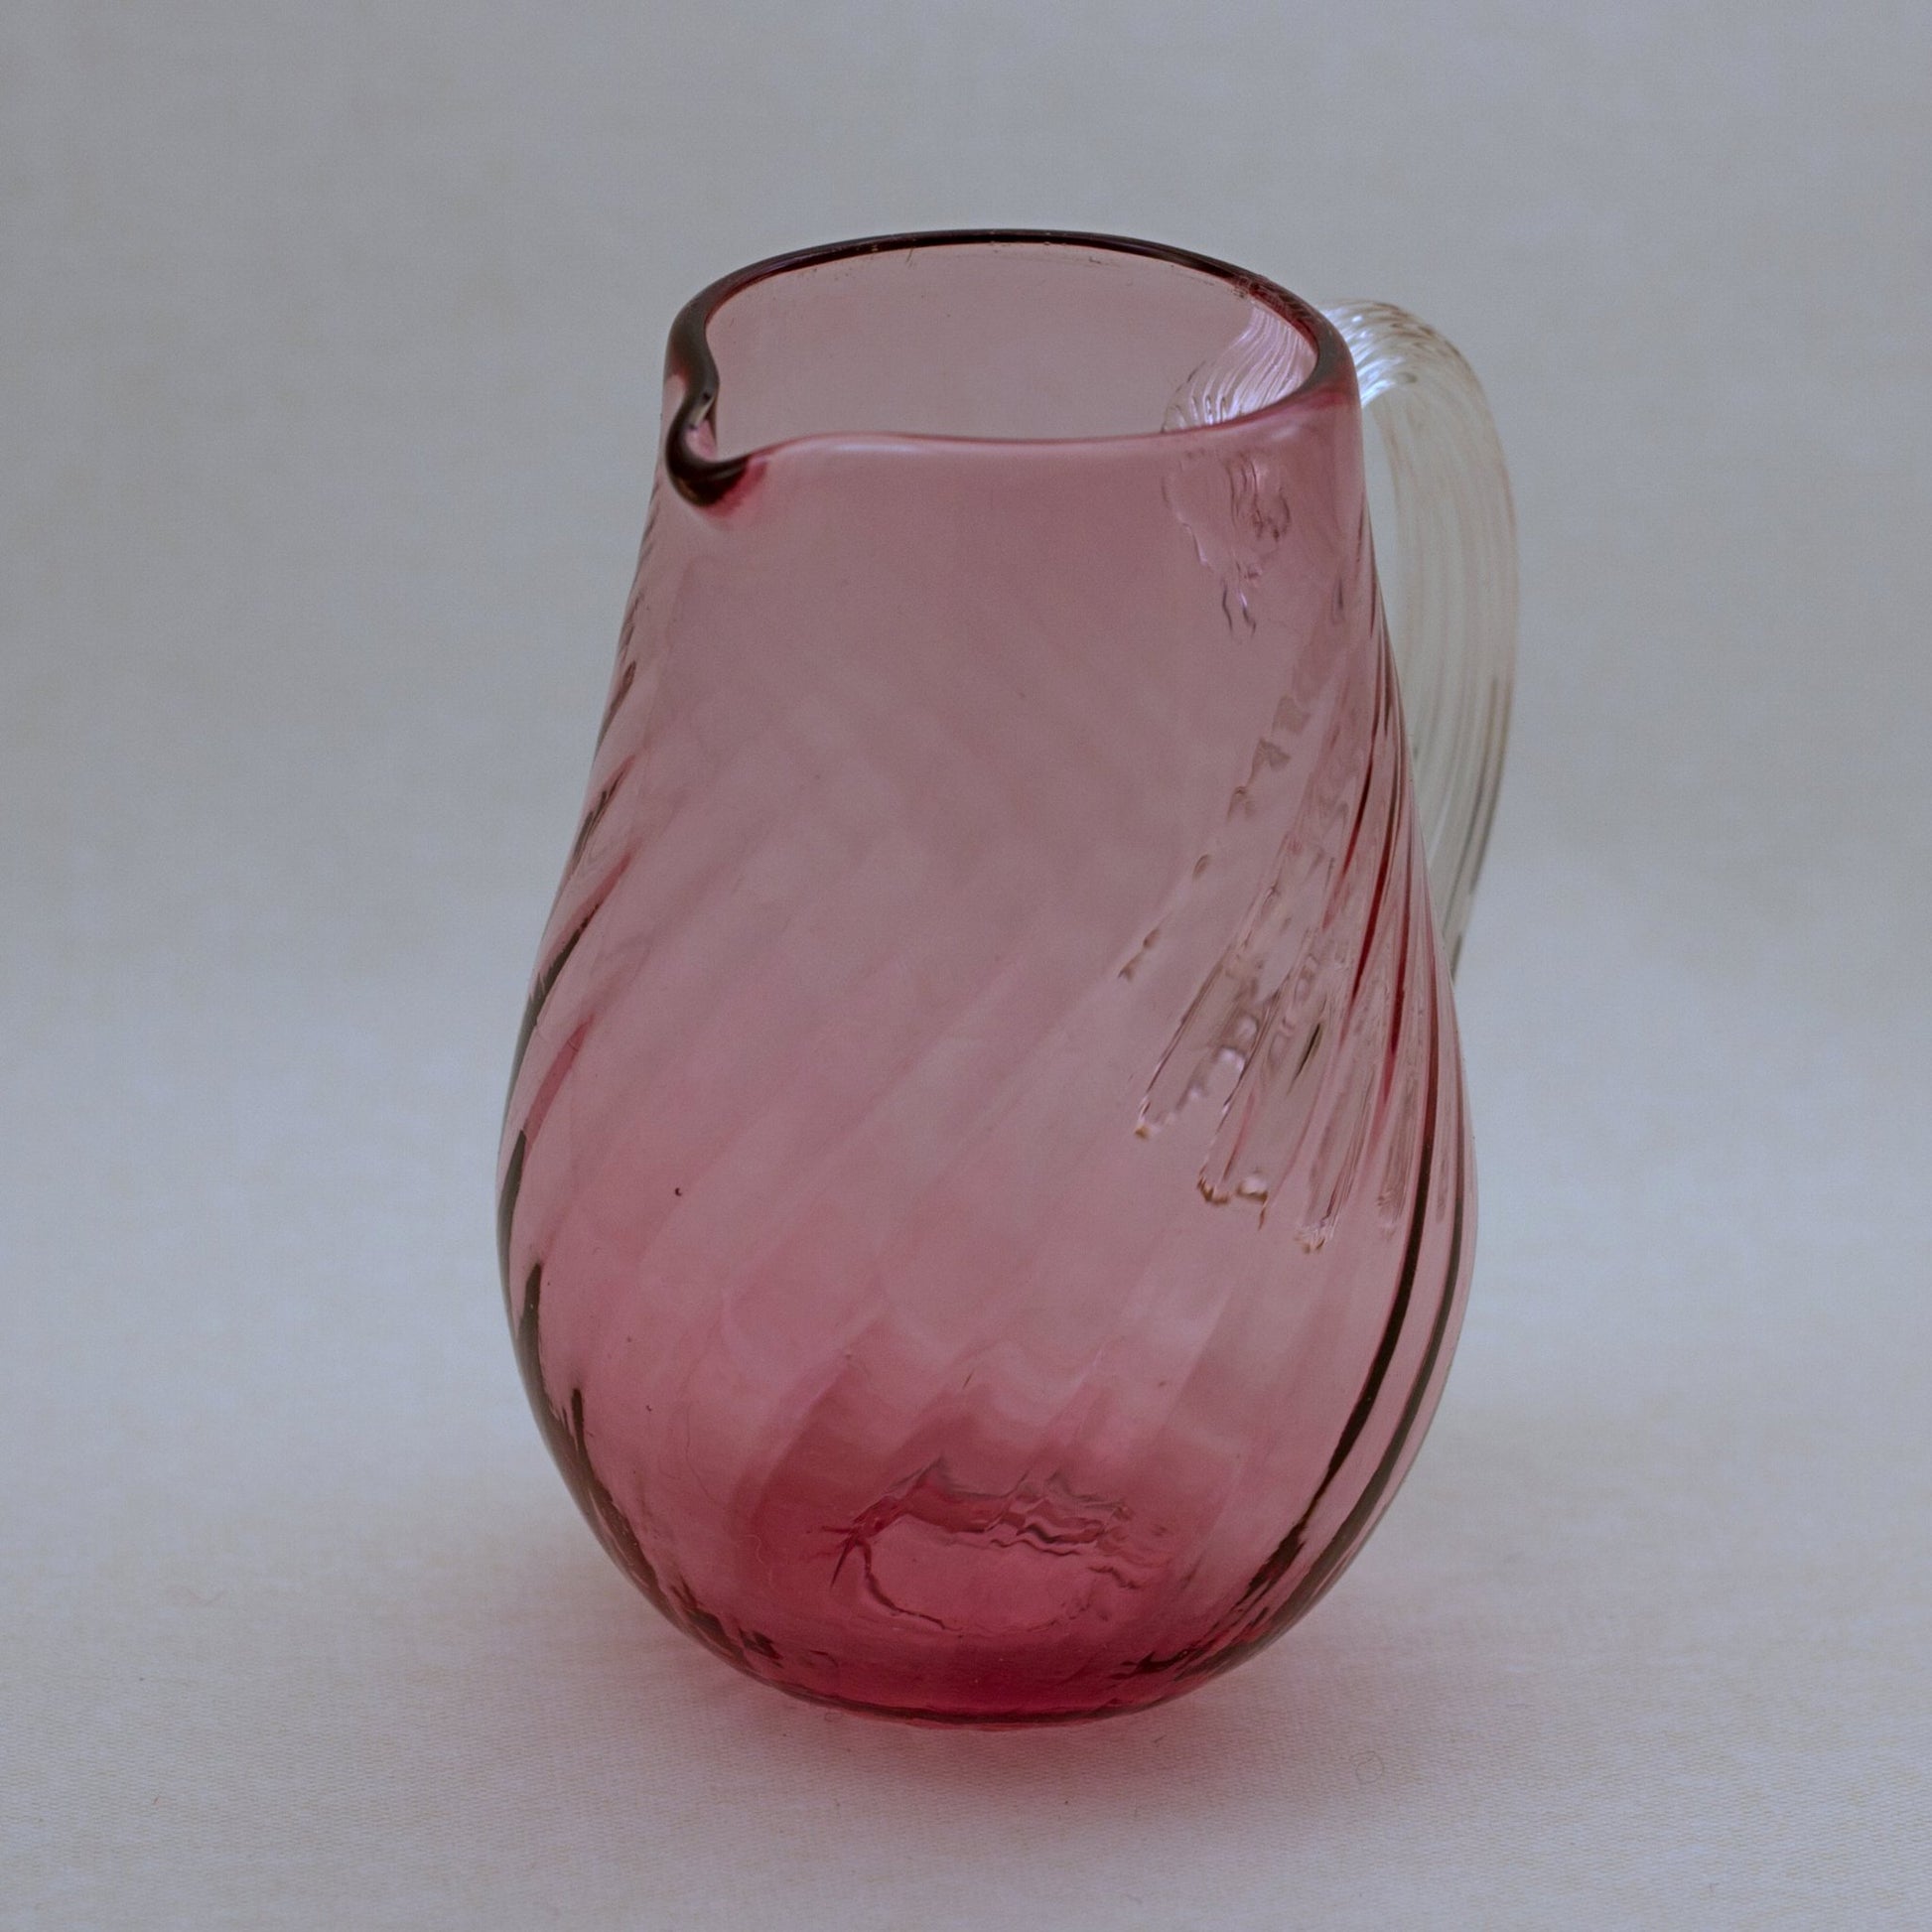 PILGRIM CRANBERRY GLASS Rose Color Pitcher with Optic Swirl